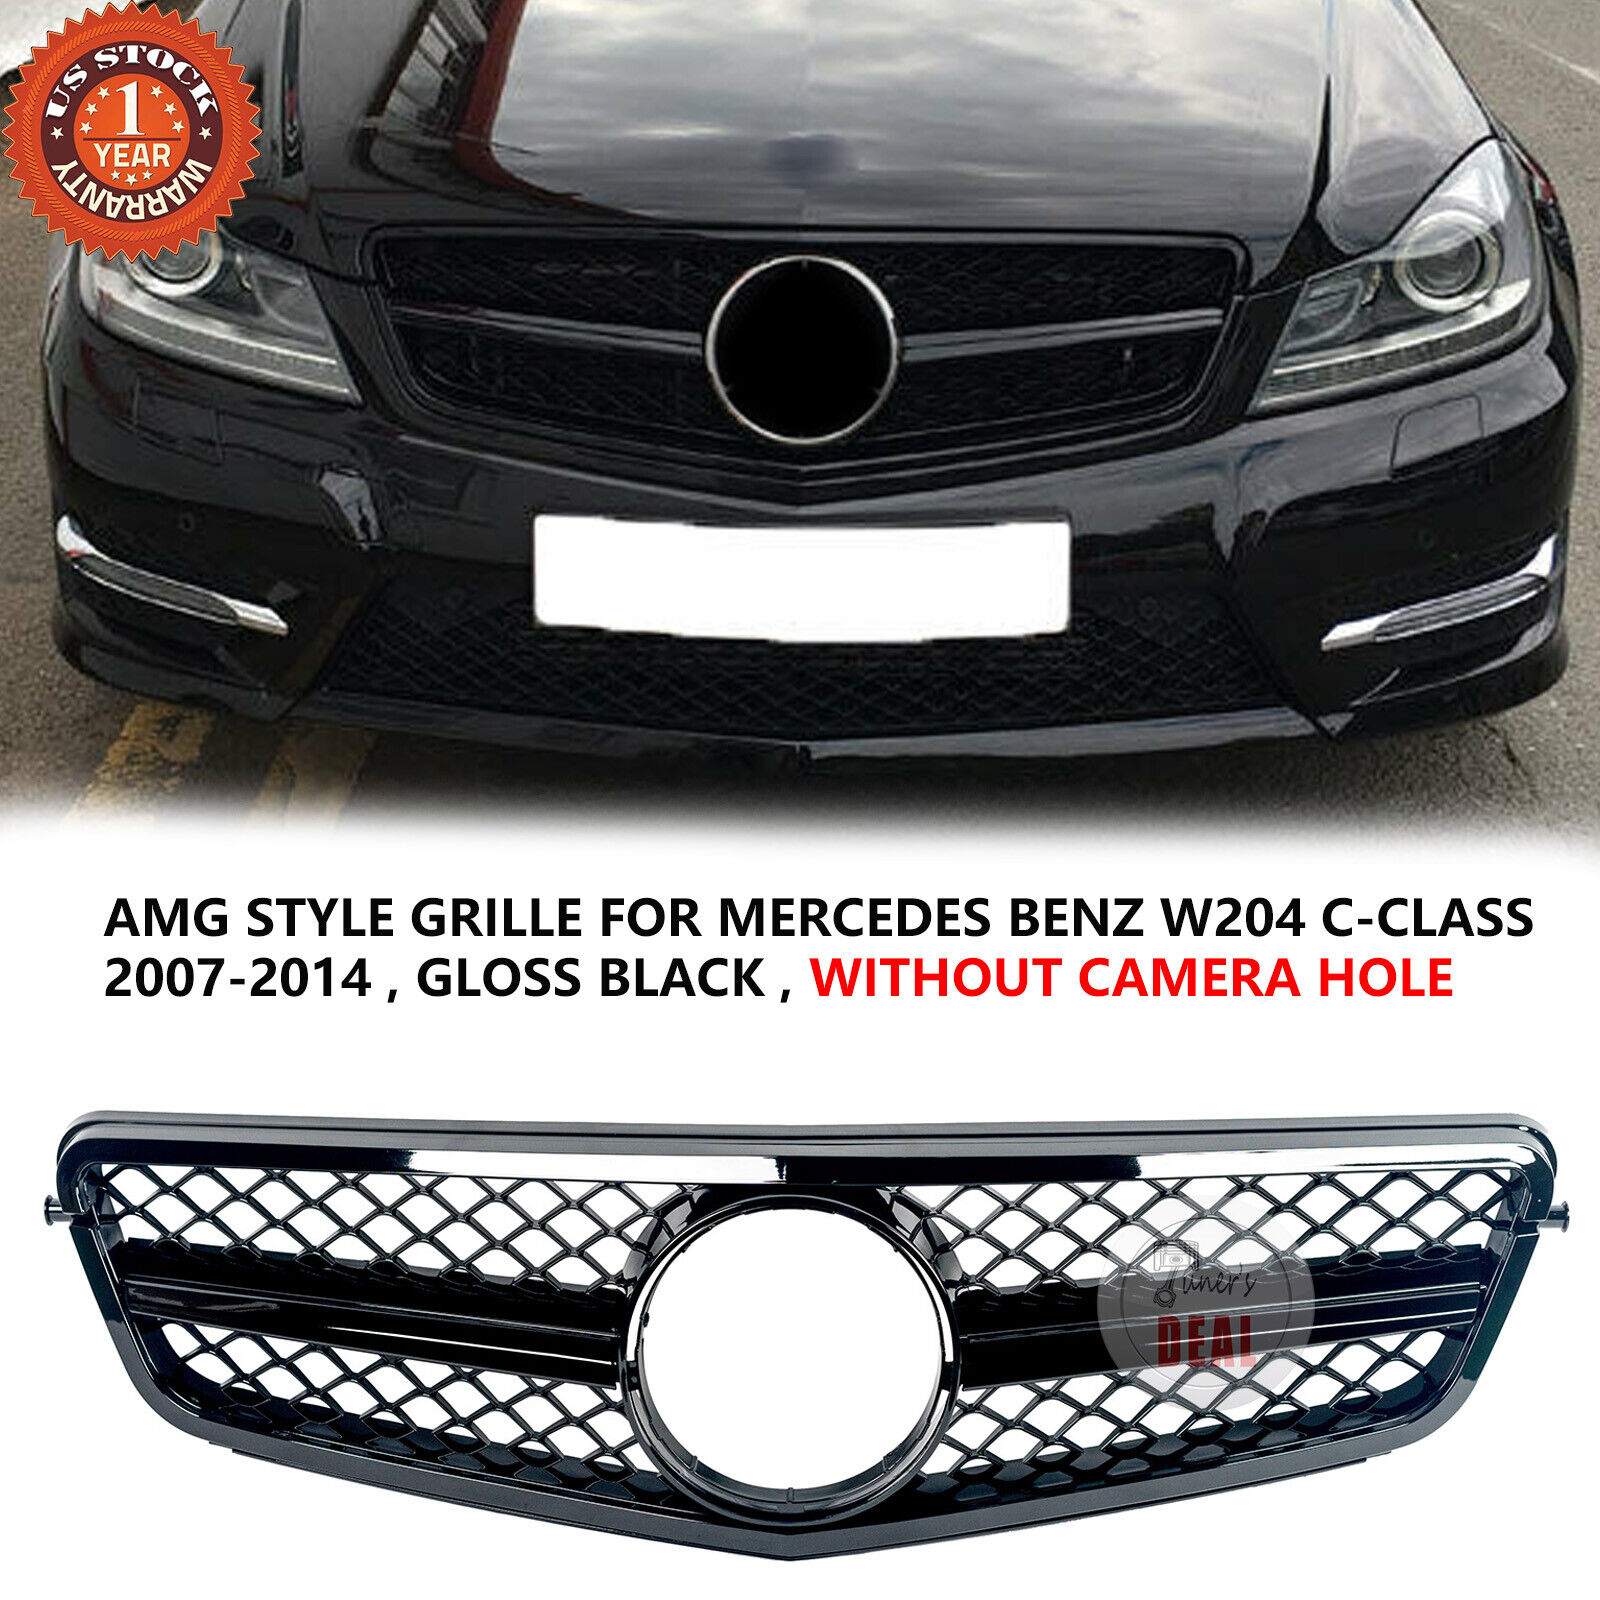 C63 AMG Style Grille Glossy Black For Mercedes Benz W204 2007-2014 C250 C300 350